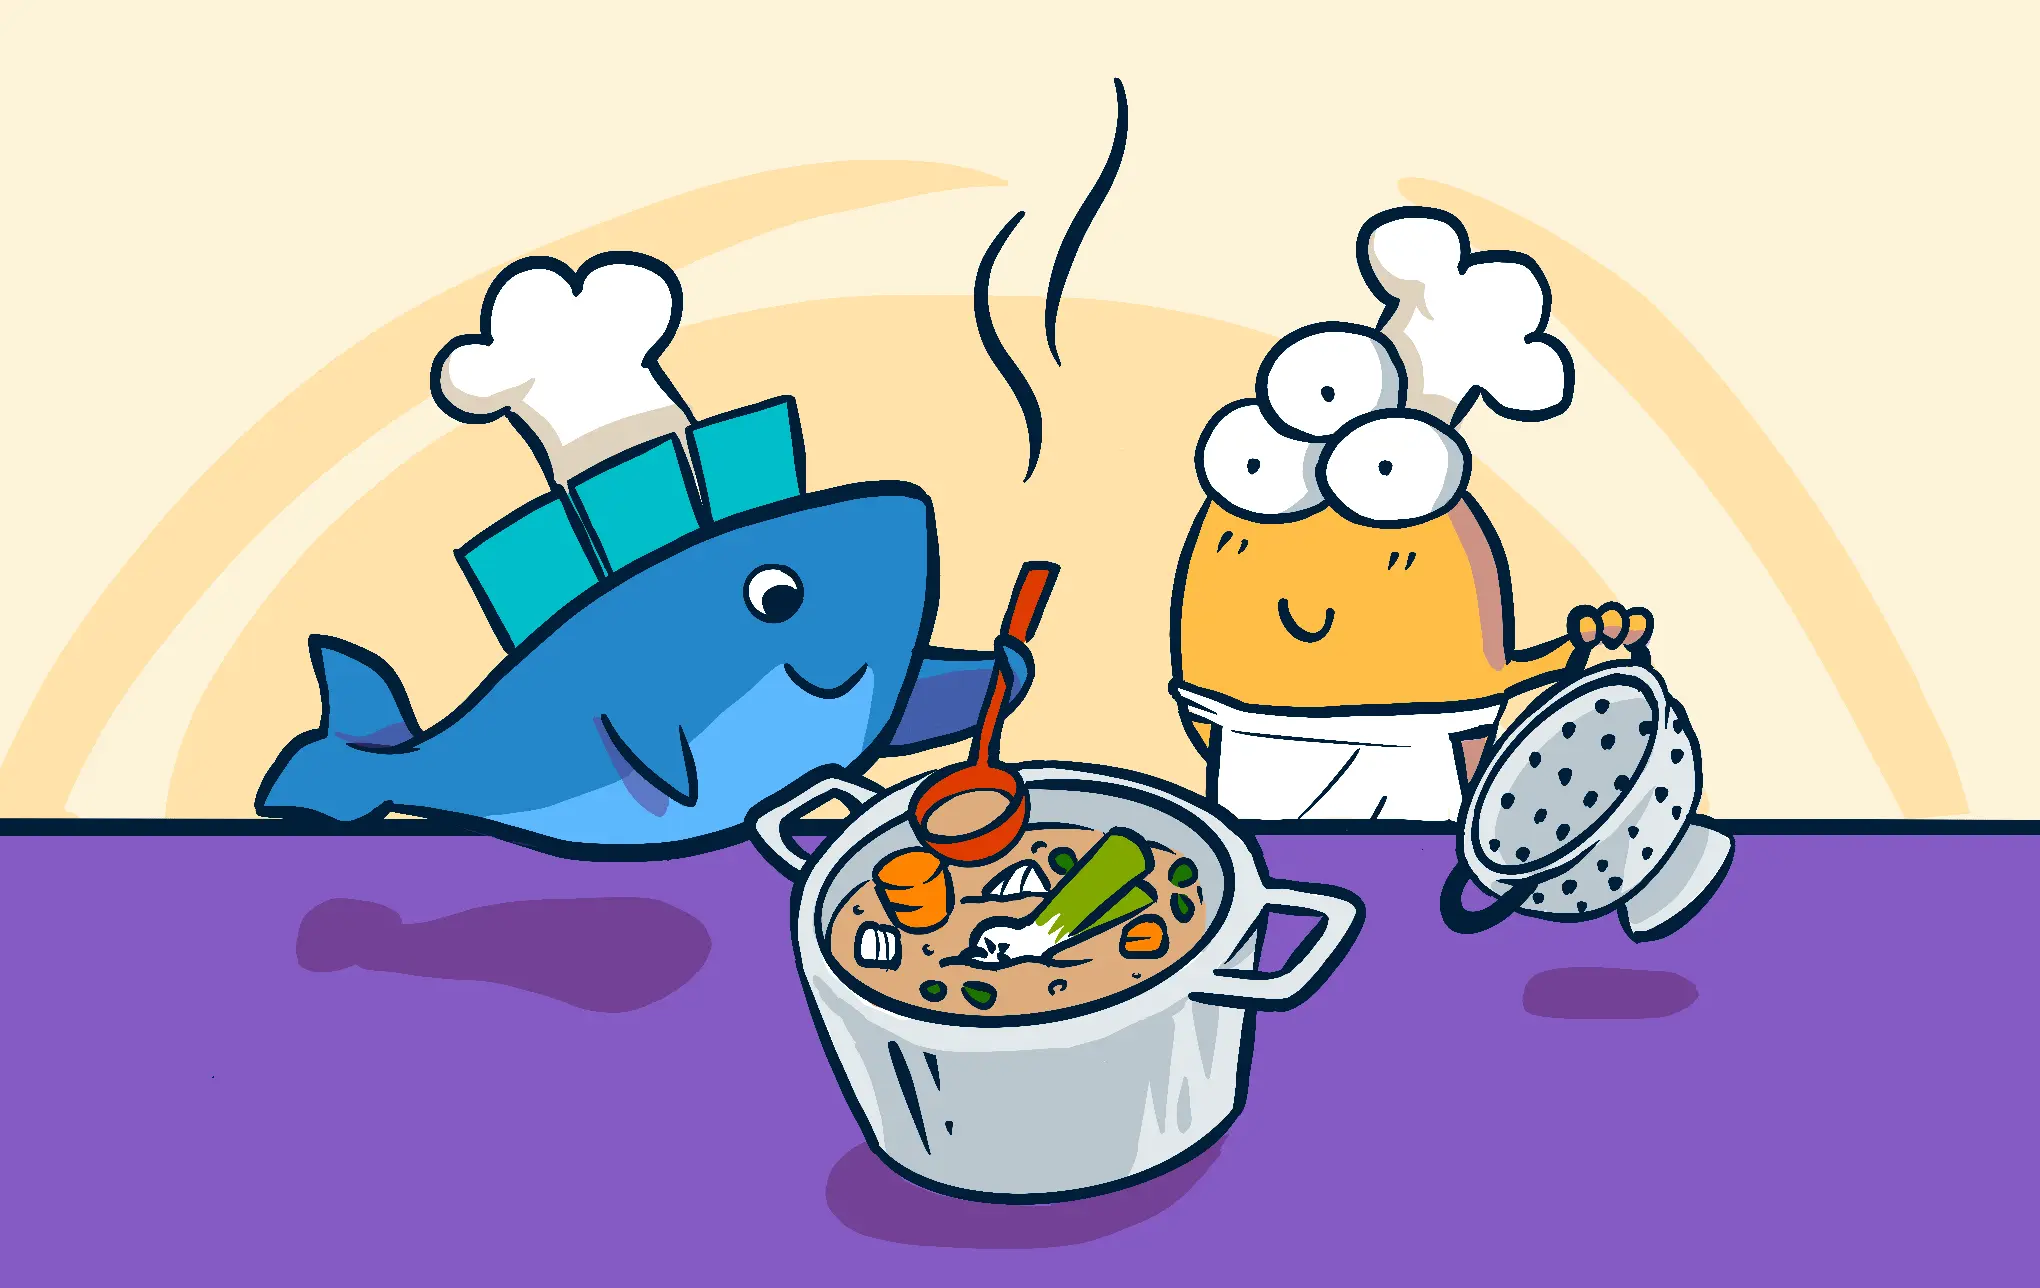 An illustration of the Docker whale and the JavaScript character making veggie stock together